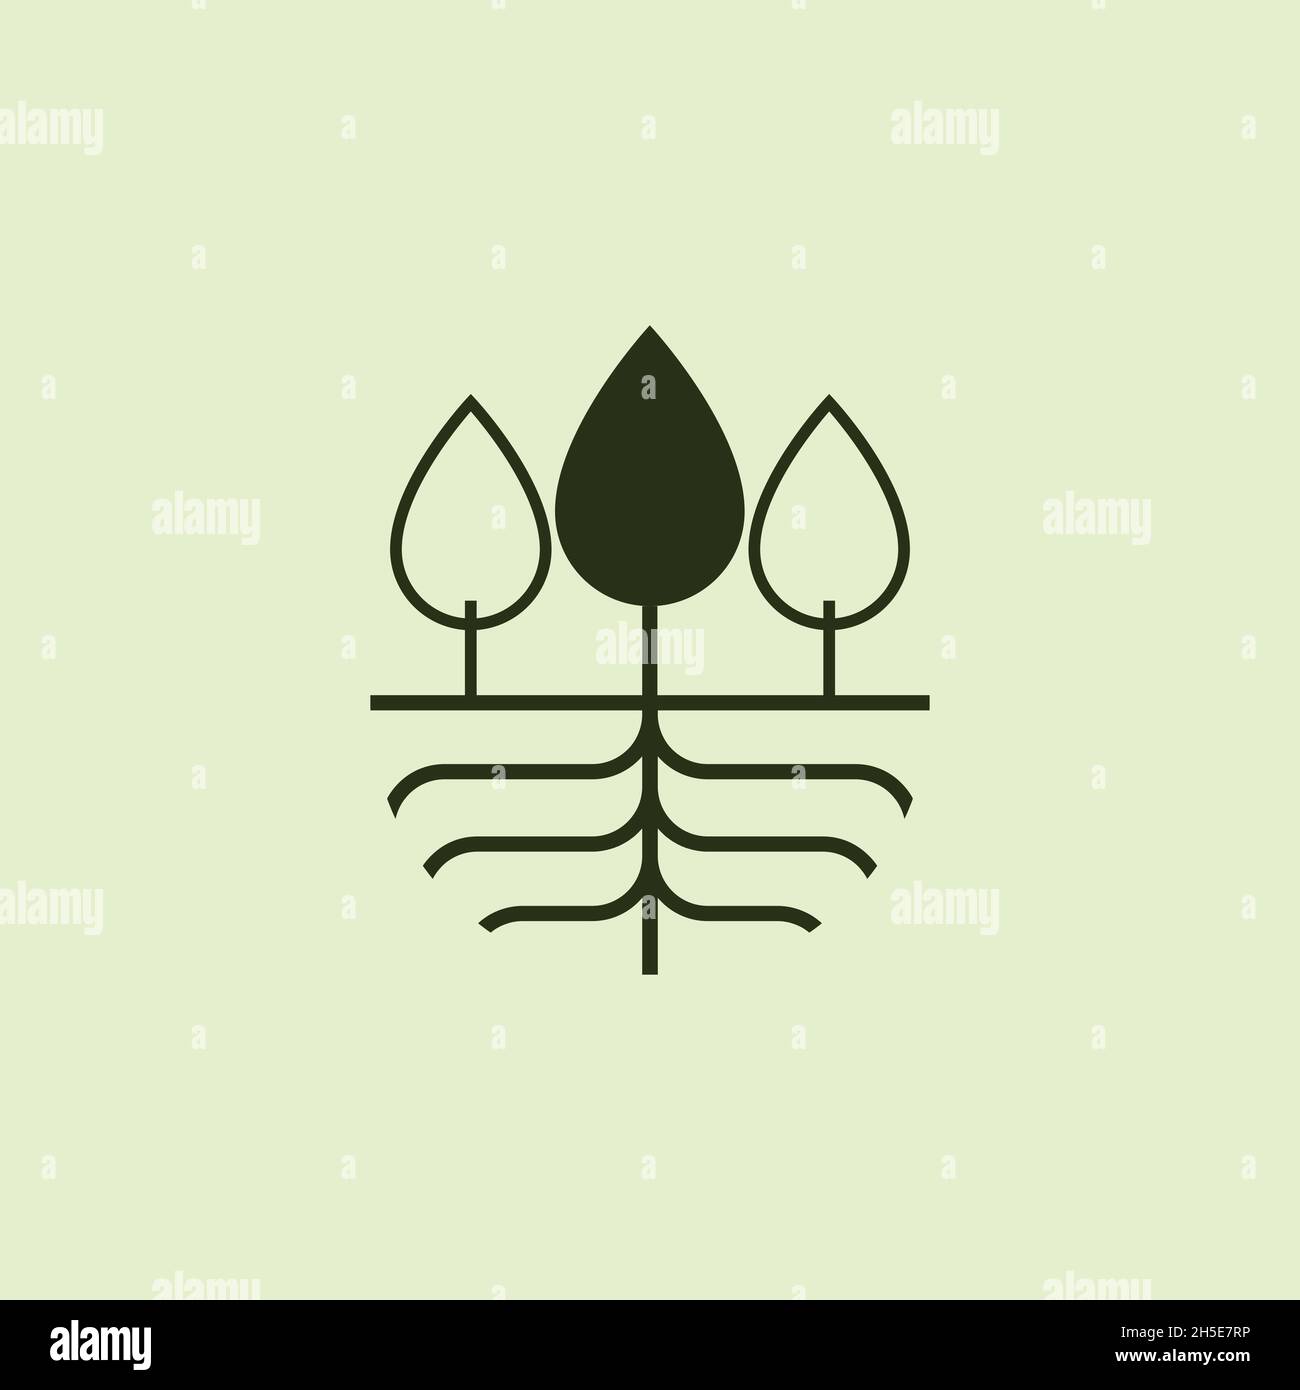 vector design. logo created from three tree with root logo. Stock Vector